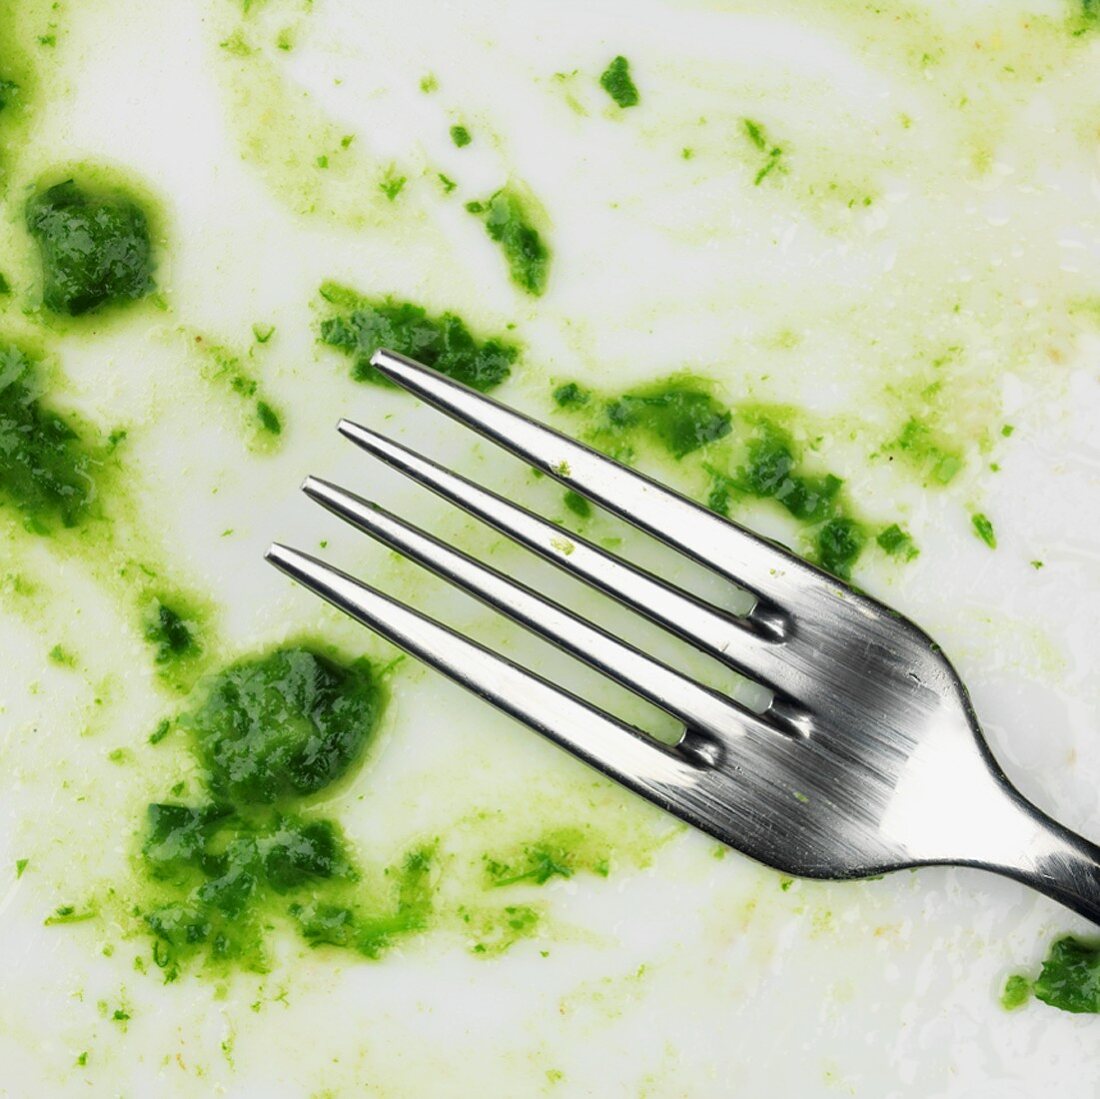 Remains of spinach on plate with fork (close-up)